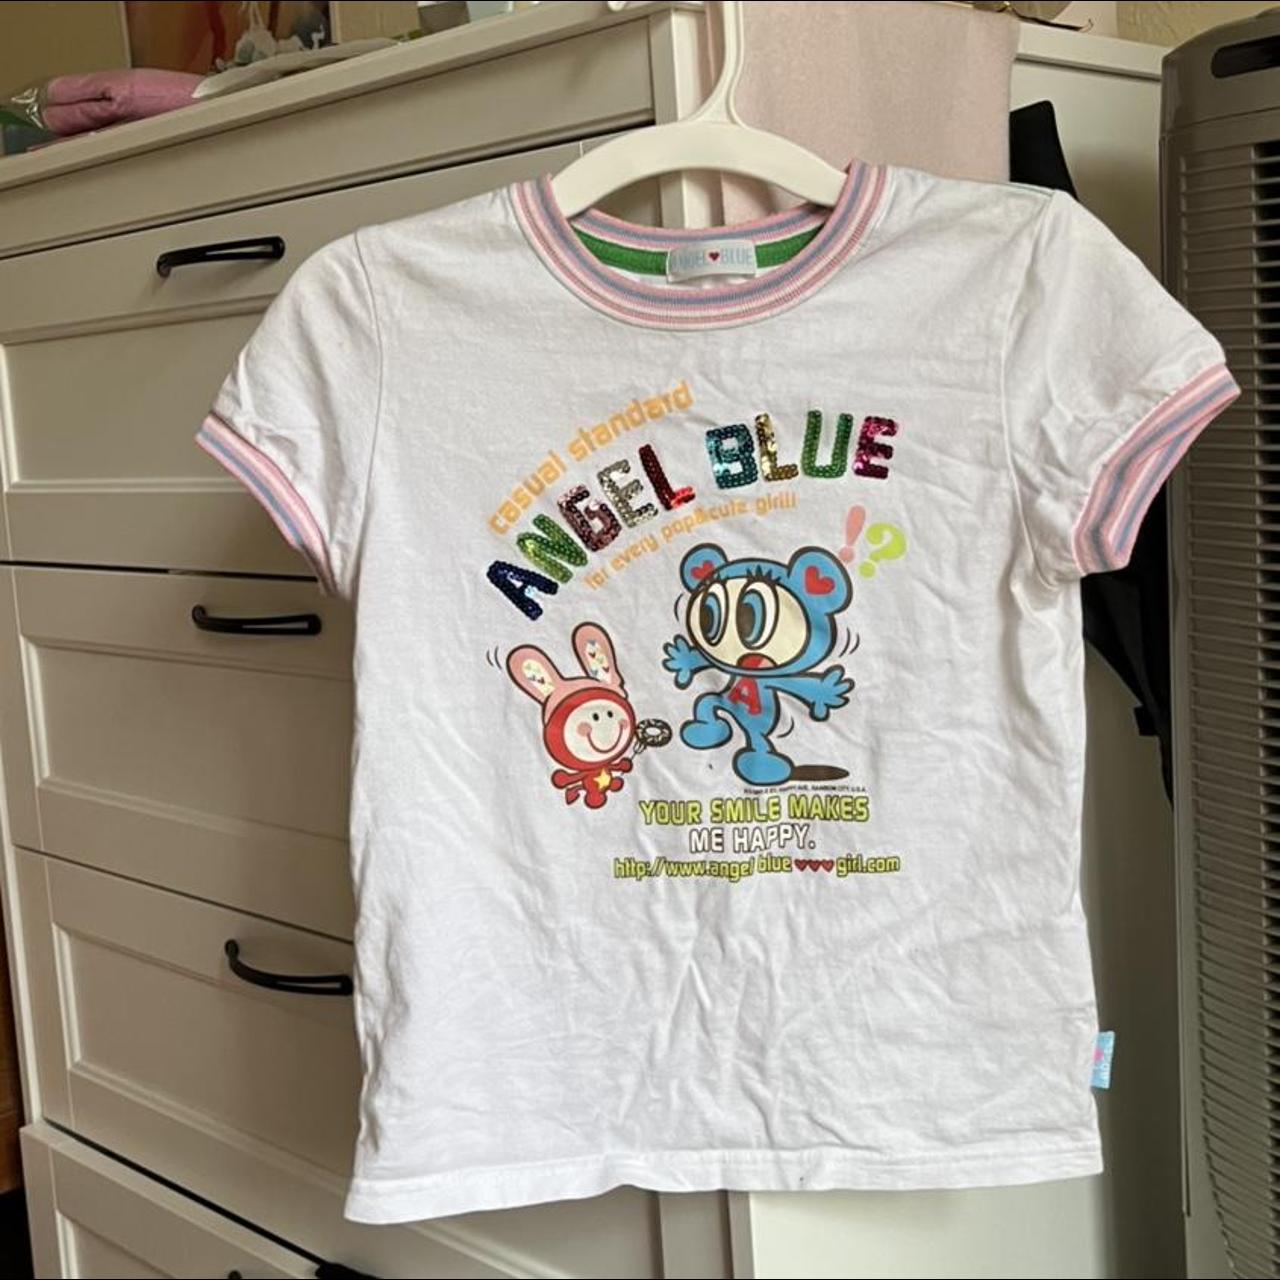 Angel Blue Women's White and Pink Crop-top